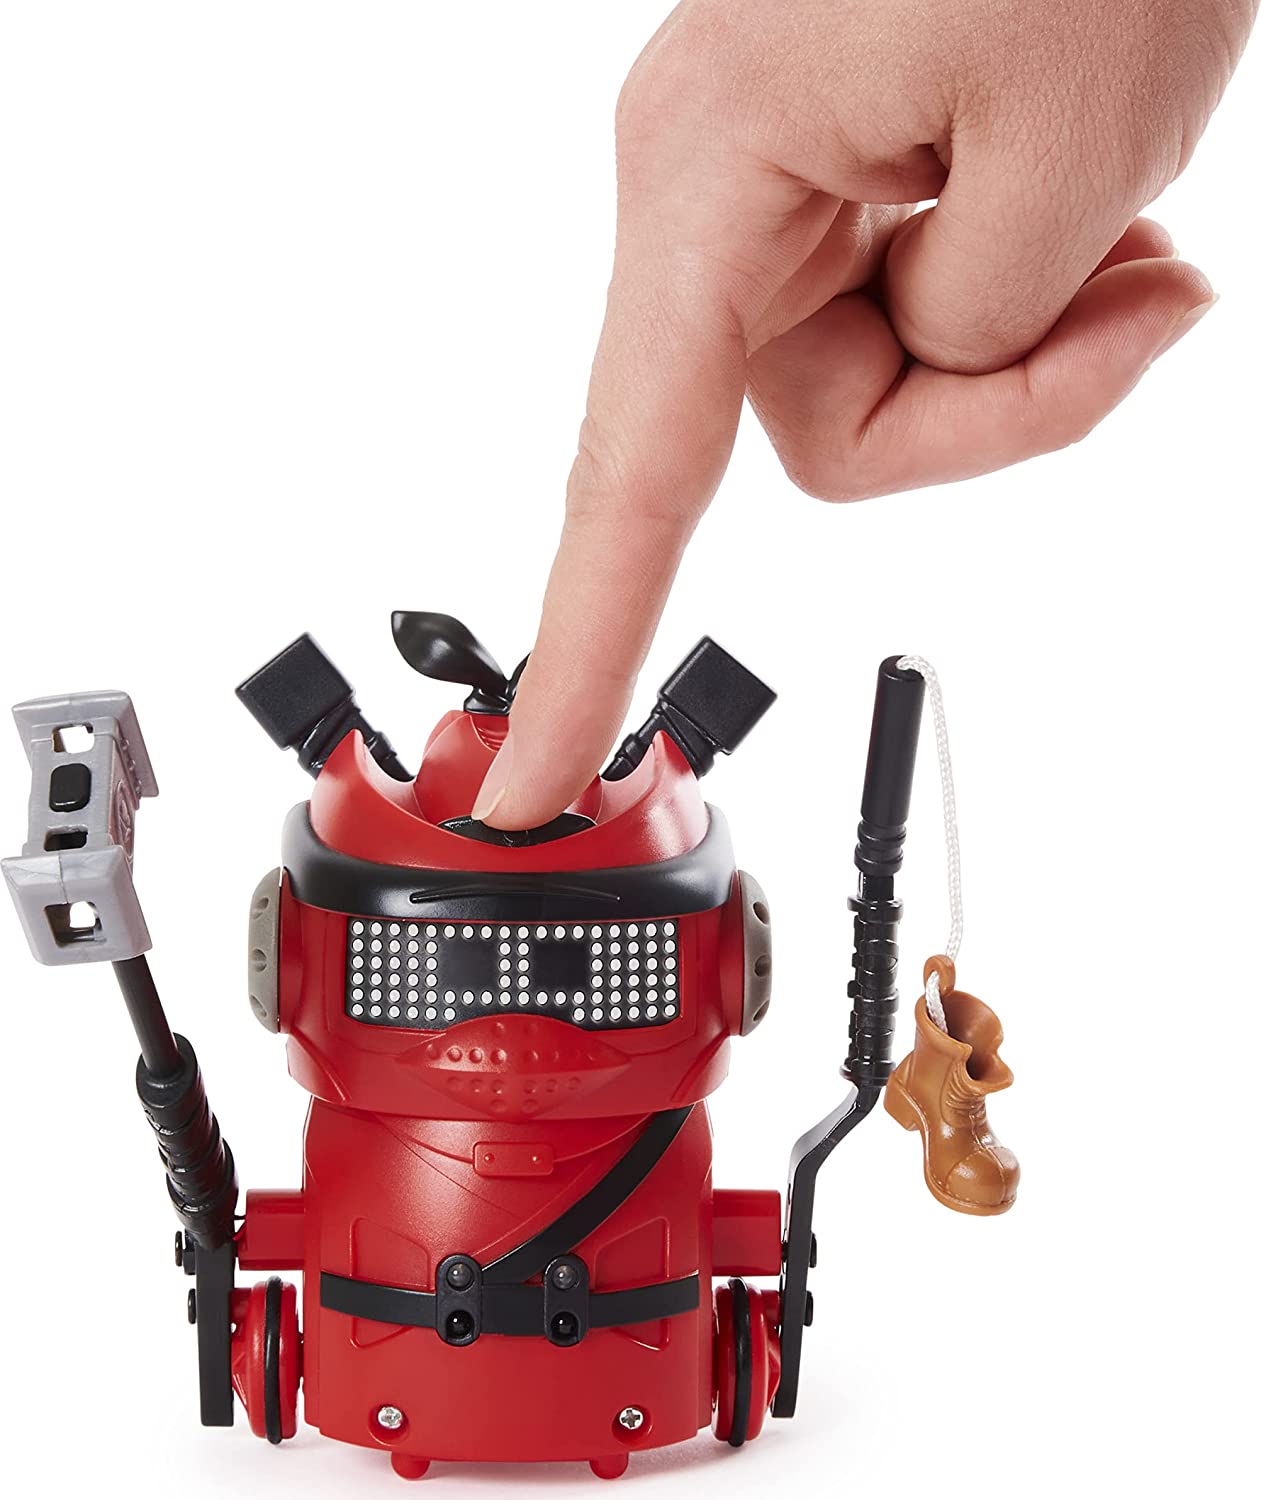 A finger is pressing down on a red Ninja Bot to show the soft material the robot is made of.